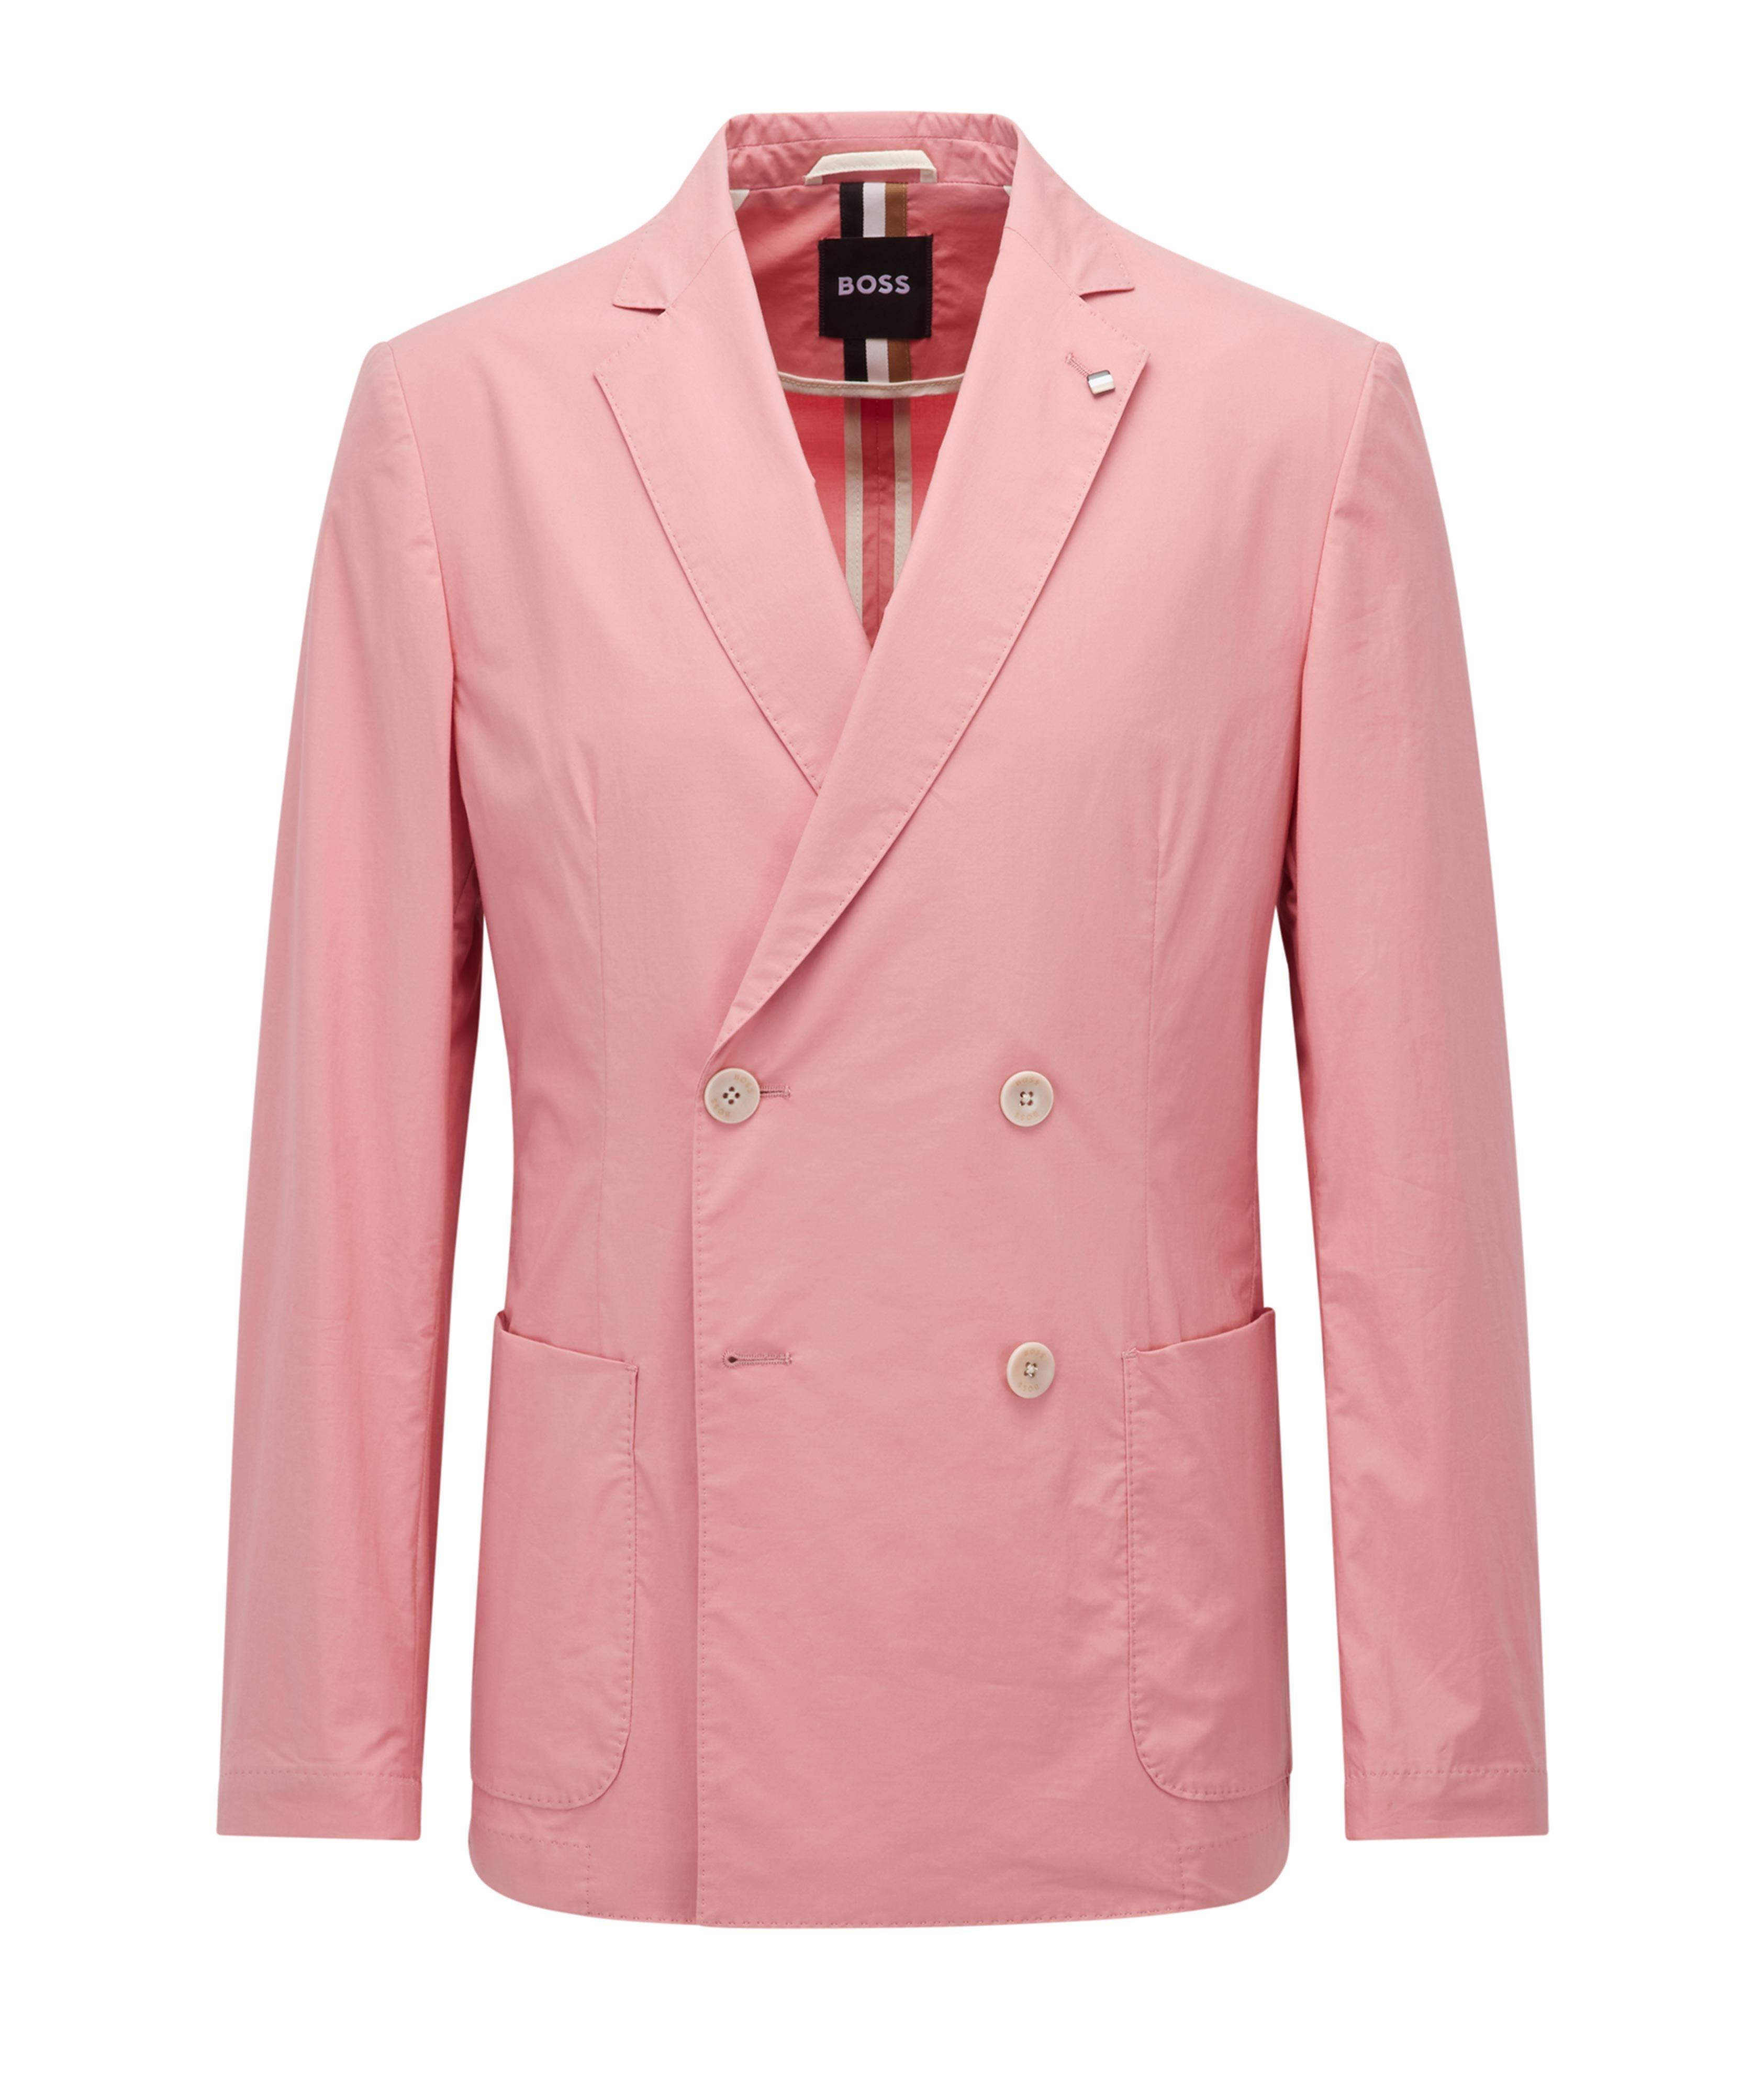 Double-Breasted Slim-Fit Jacket  image 0